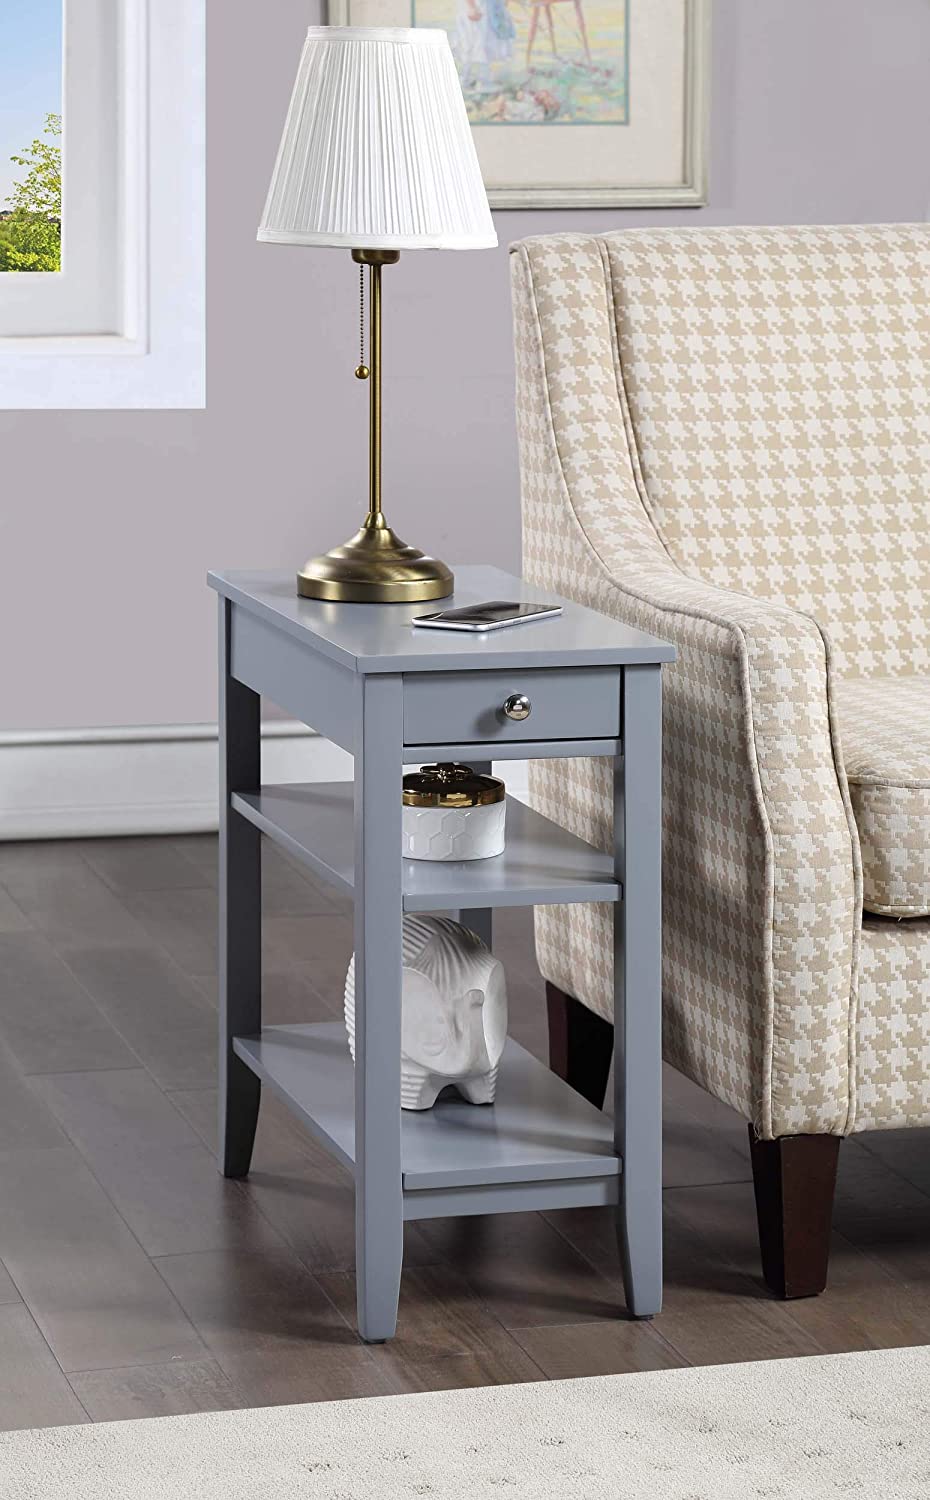 Side Tables : American Heritage Three Tier End Table with Drawer